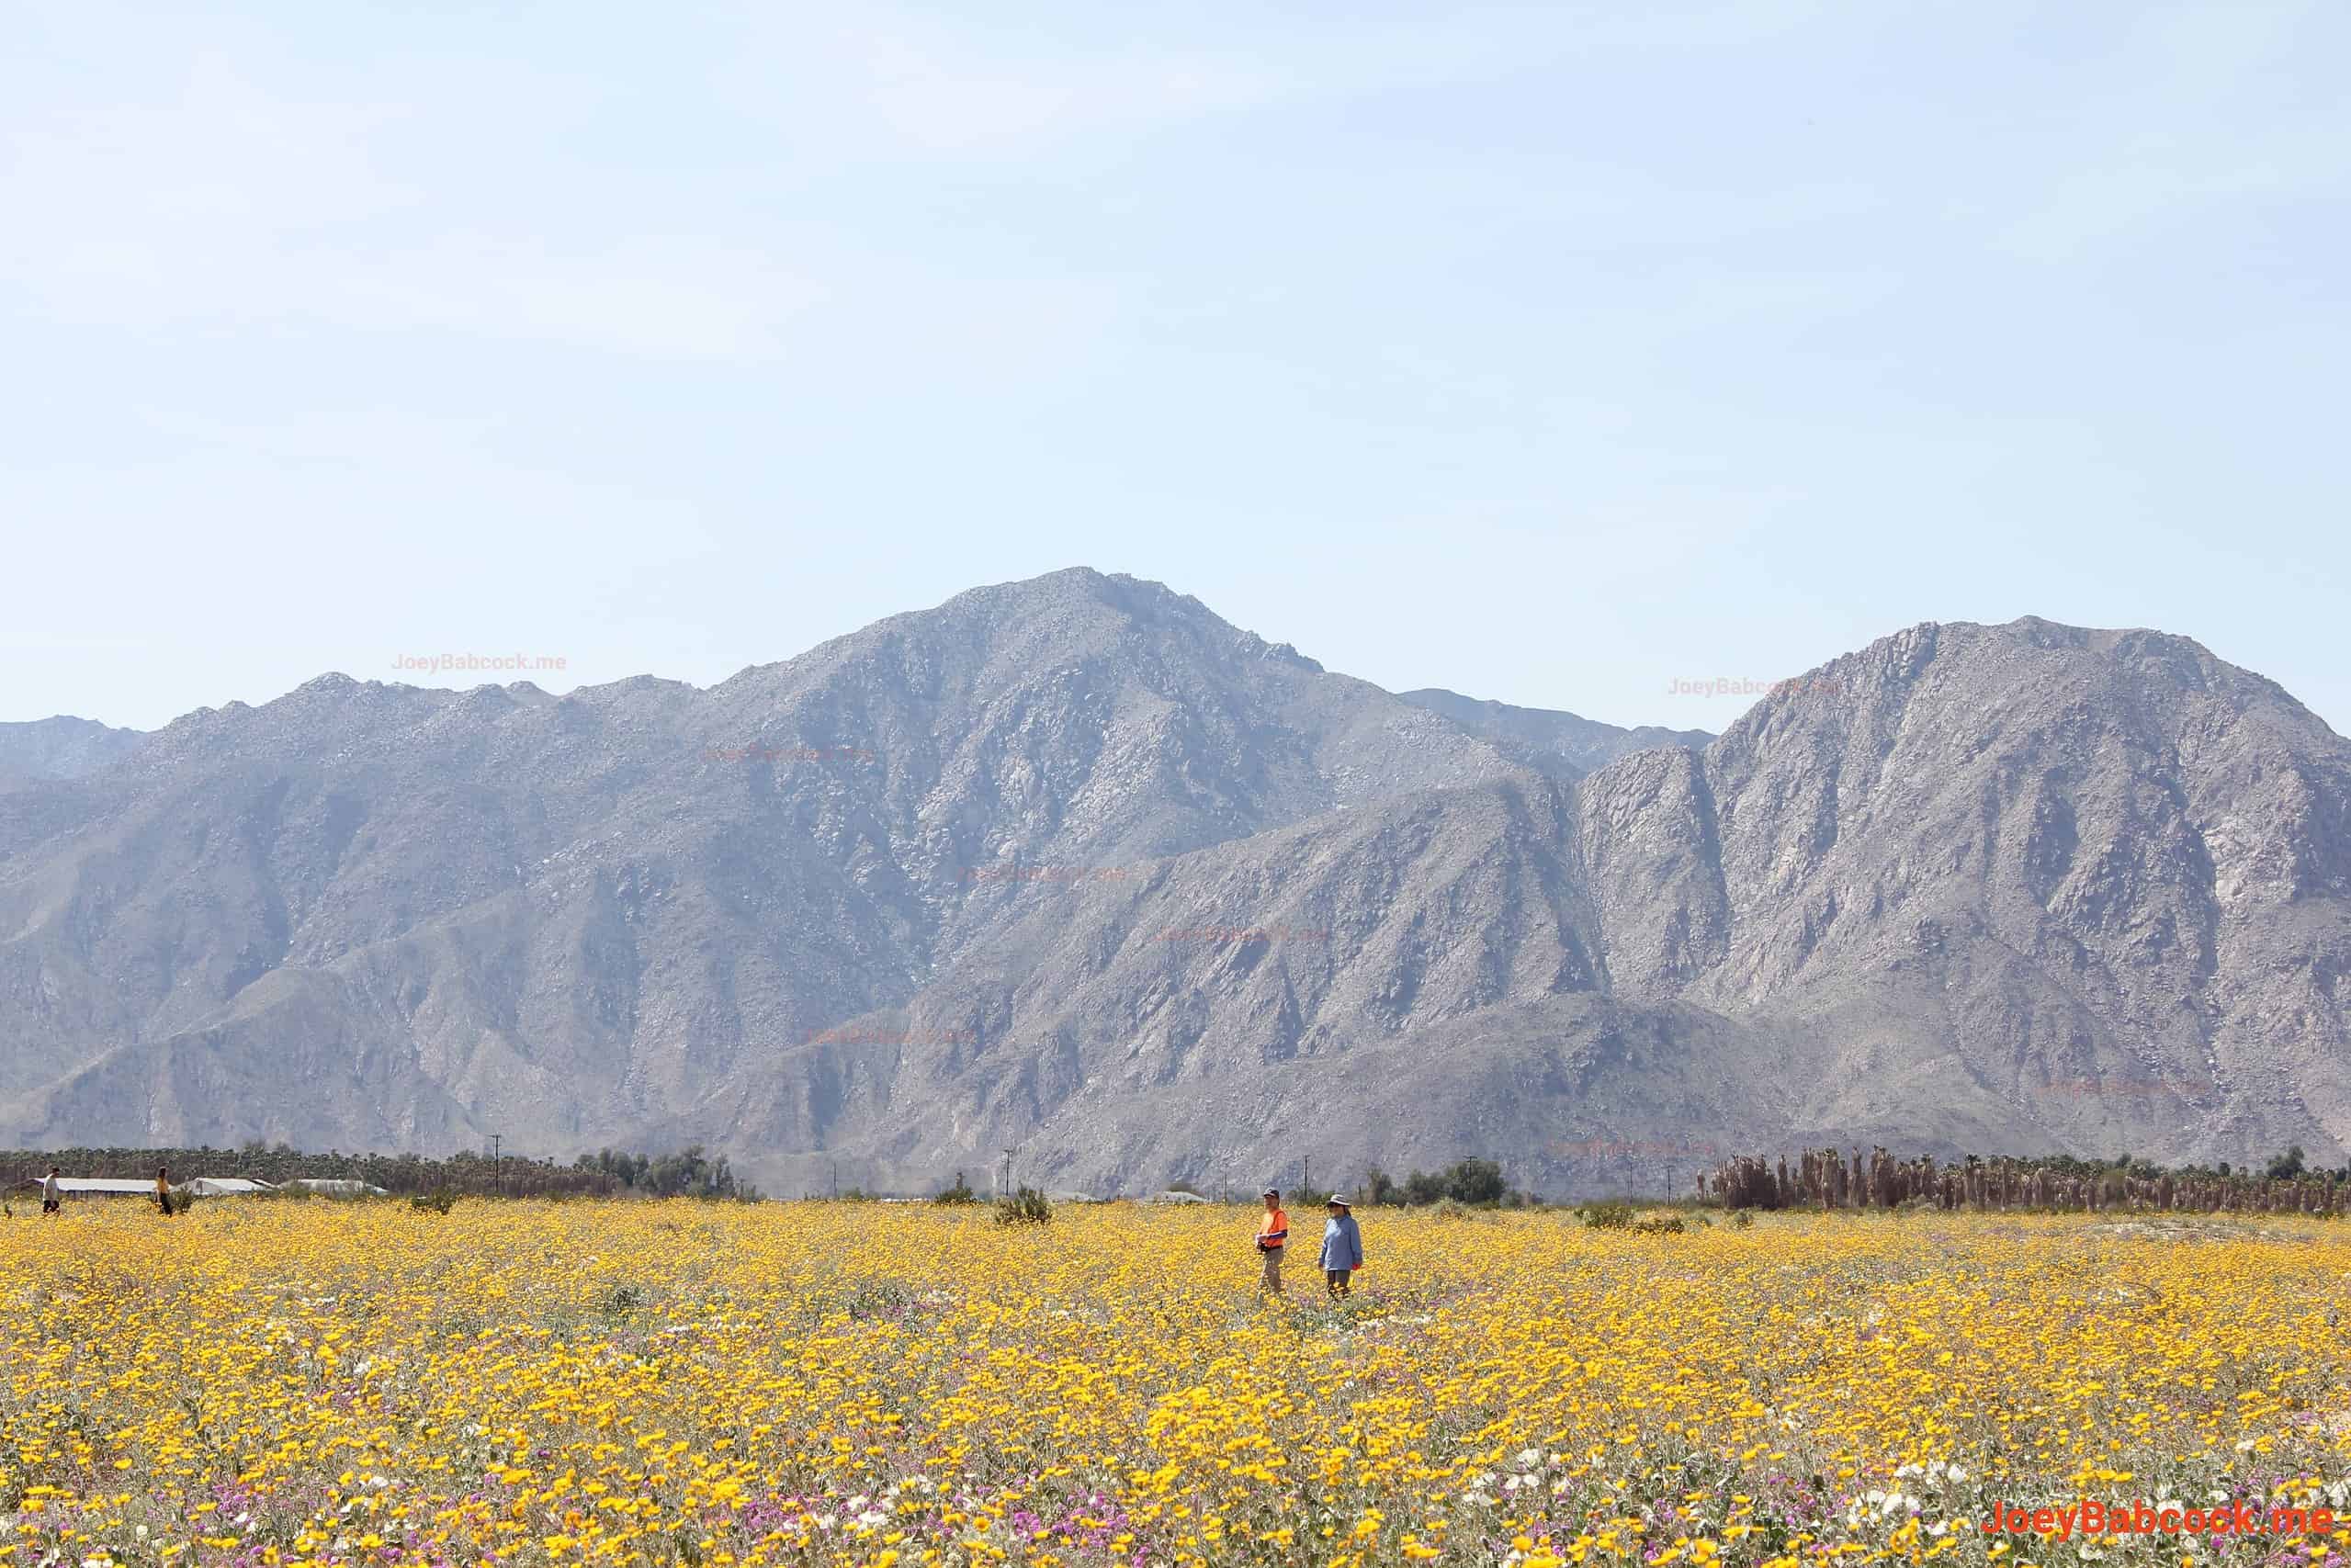 A couple hikes through the fields of desert sunflowers. (c) Joey Babcock March 2024 - Borrego Springs, CA